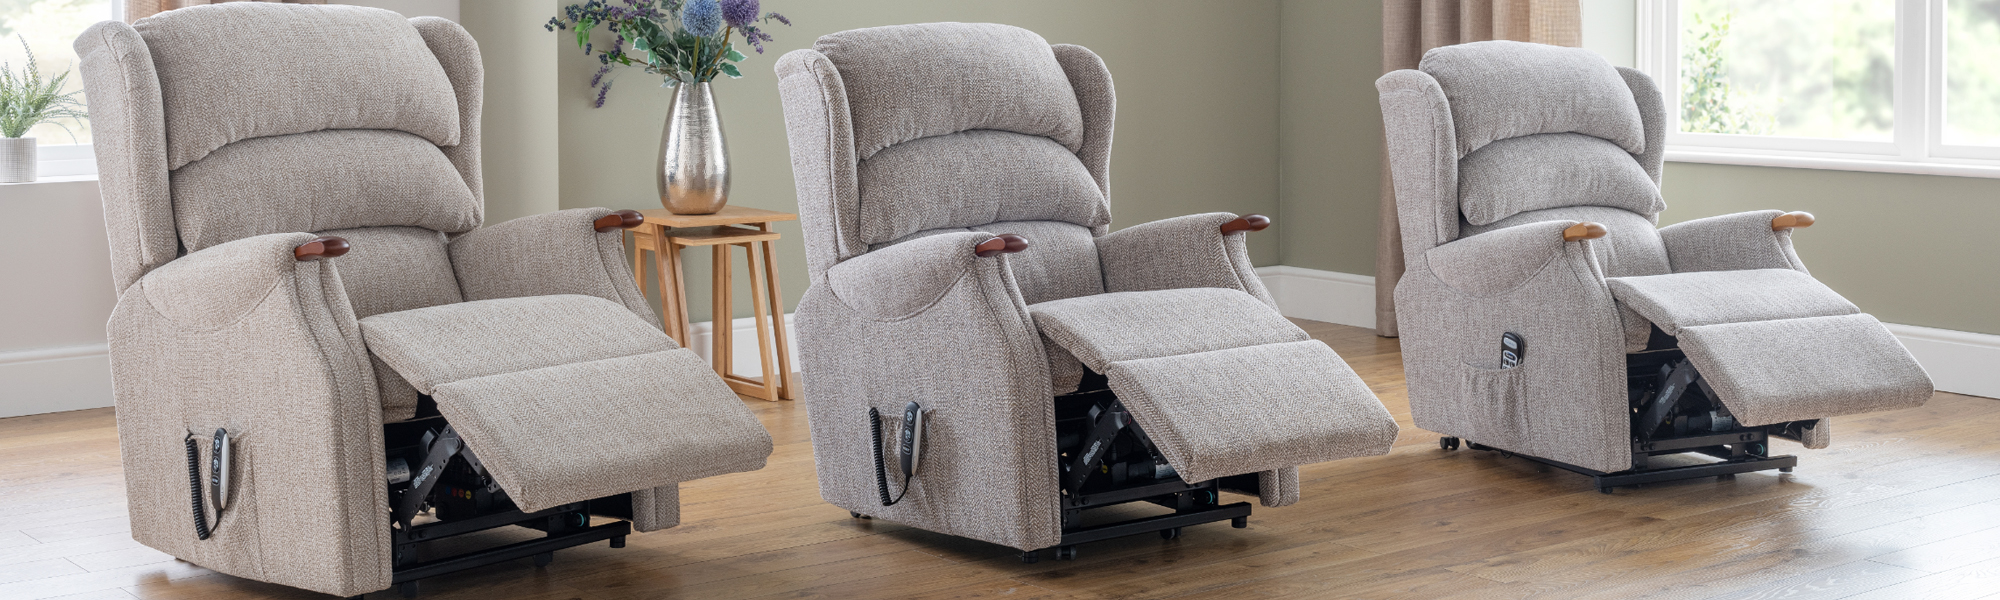 Fabric Manual Recliner Chairs